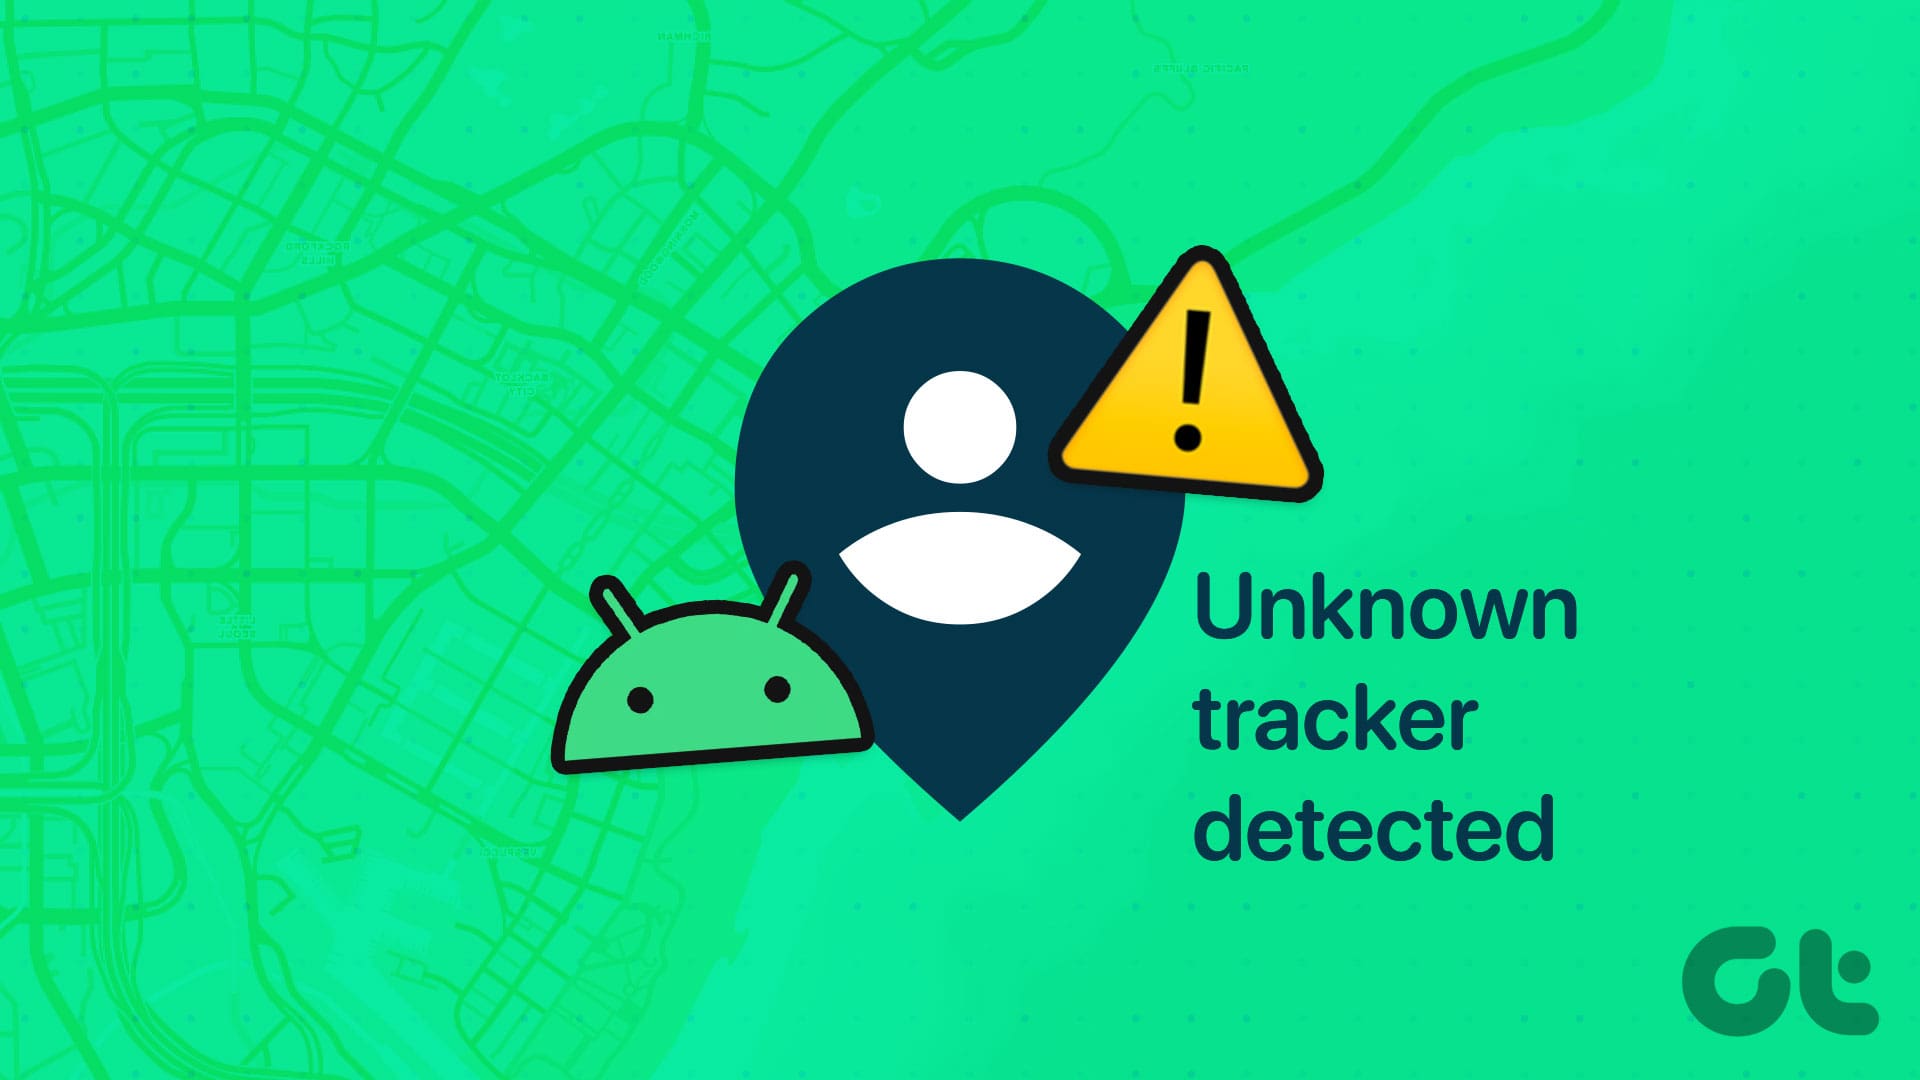 What are unknown tracker alerts on Android? How they work